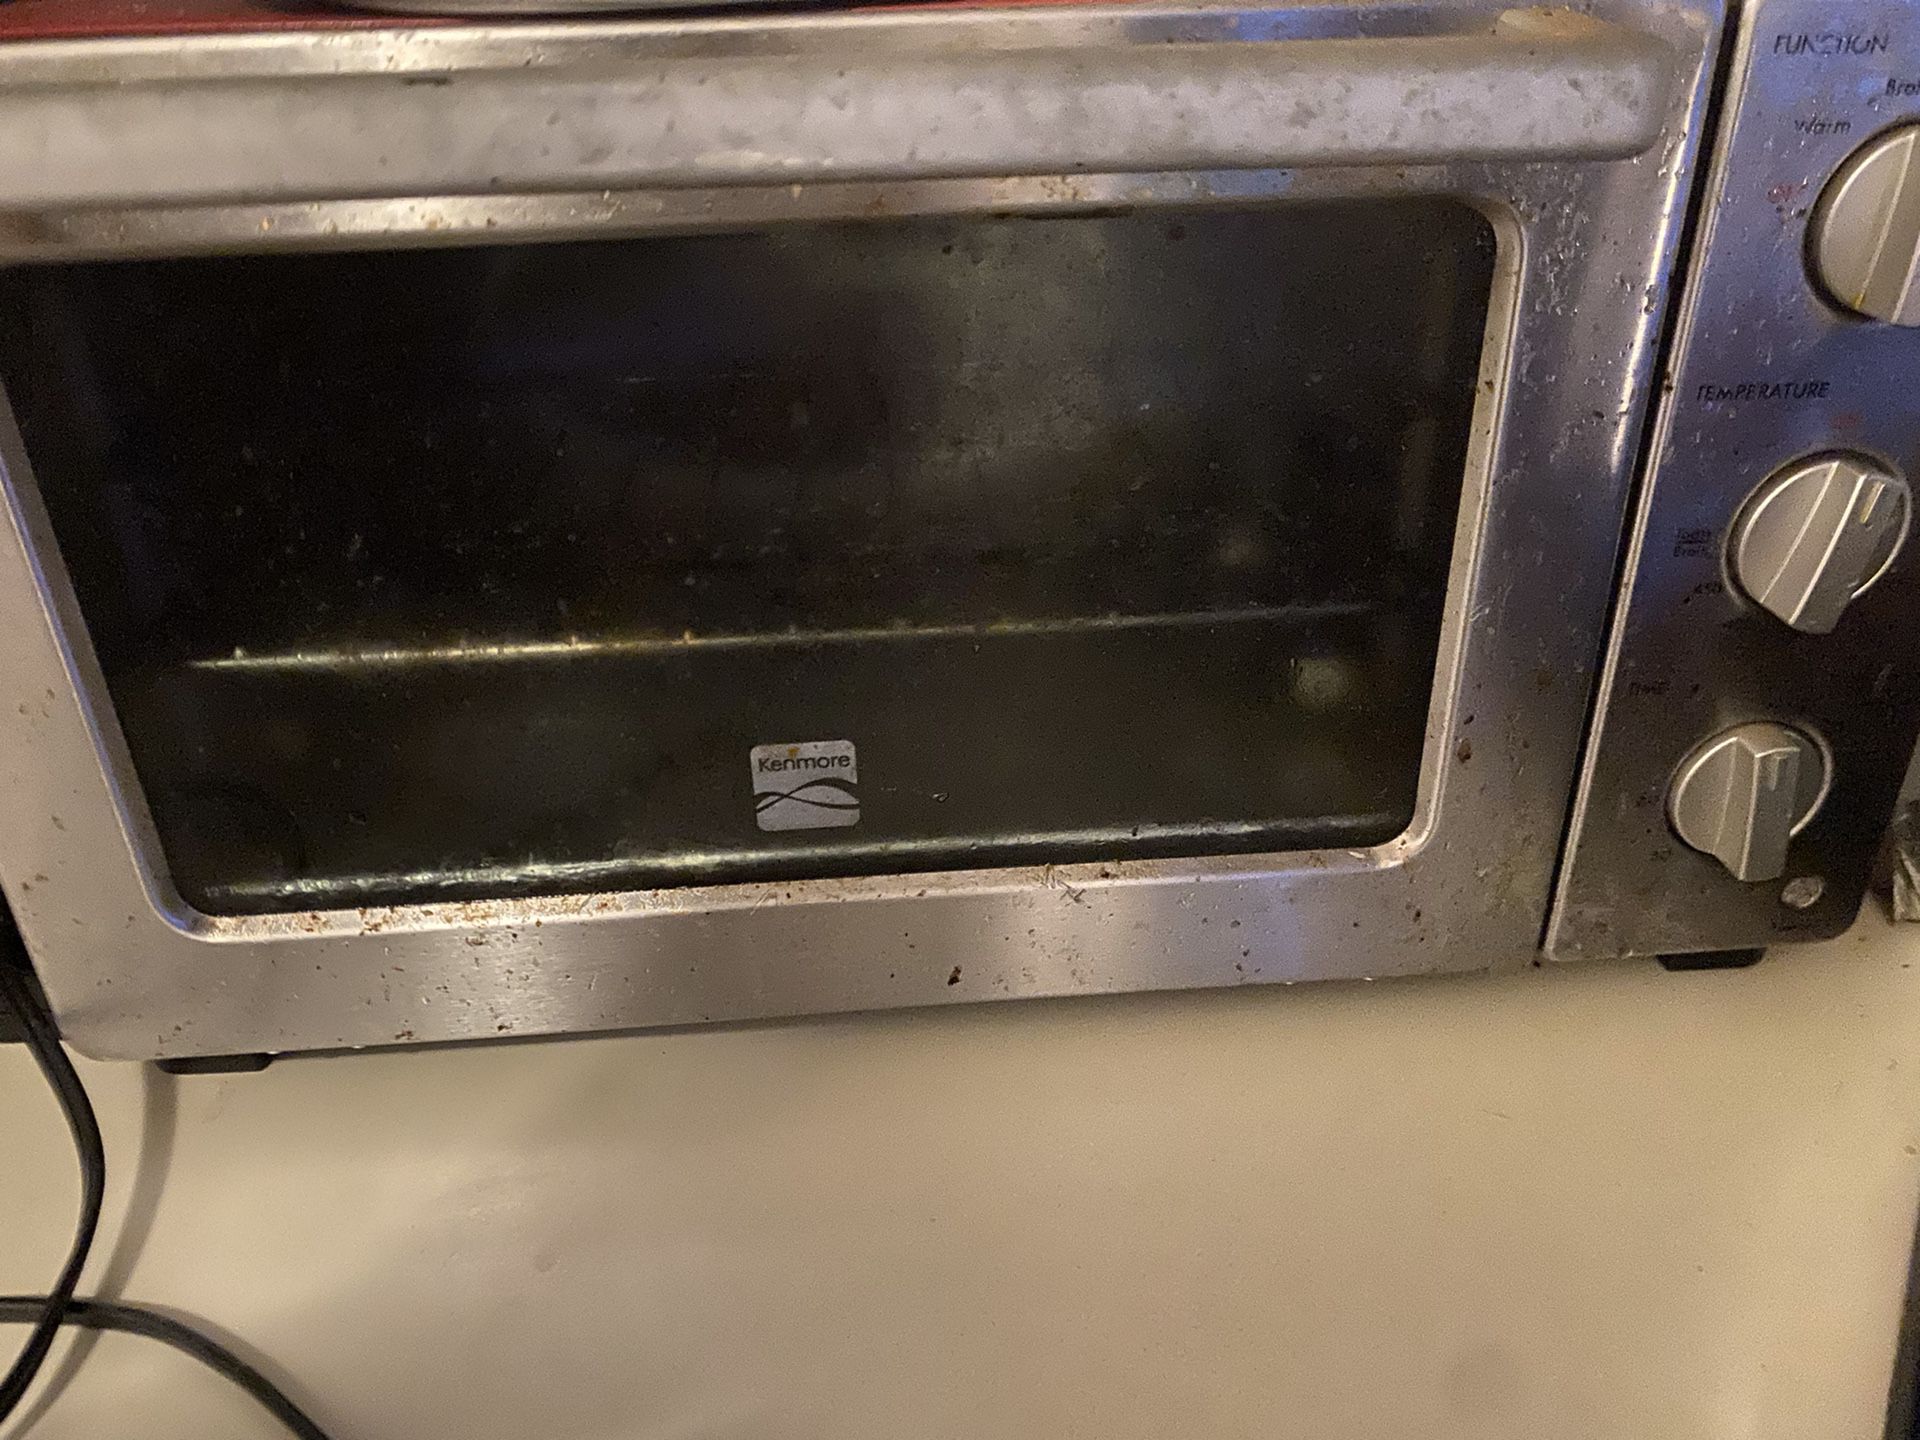 Toaster Oven. Very Convenient . One Of My Best Kitchen Appliance. Works Very Good. Make Offer